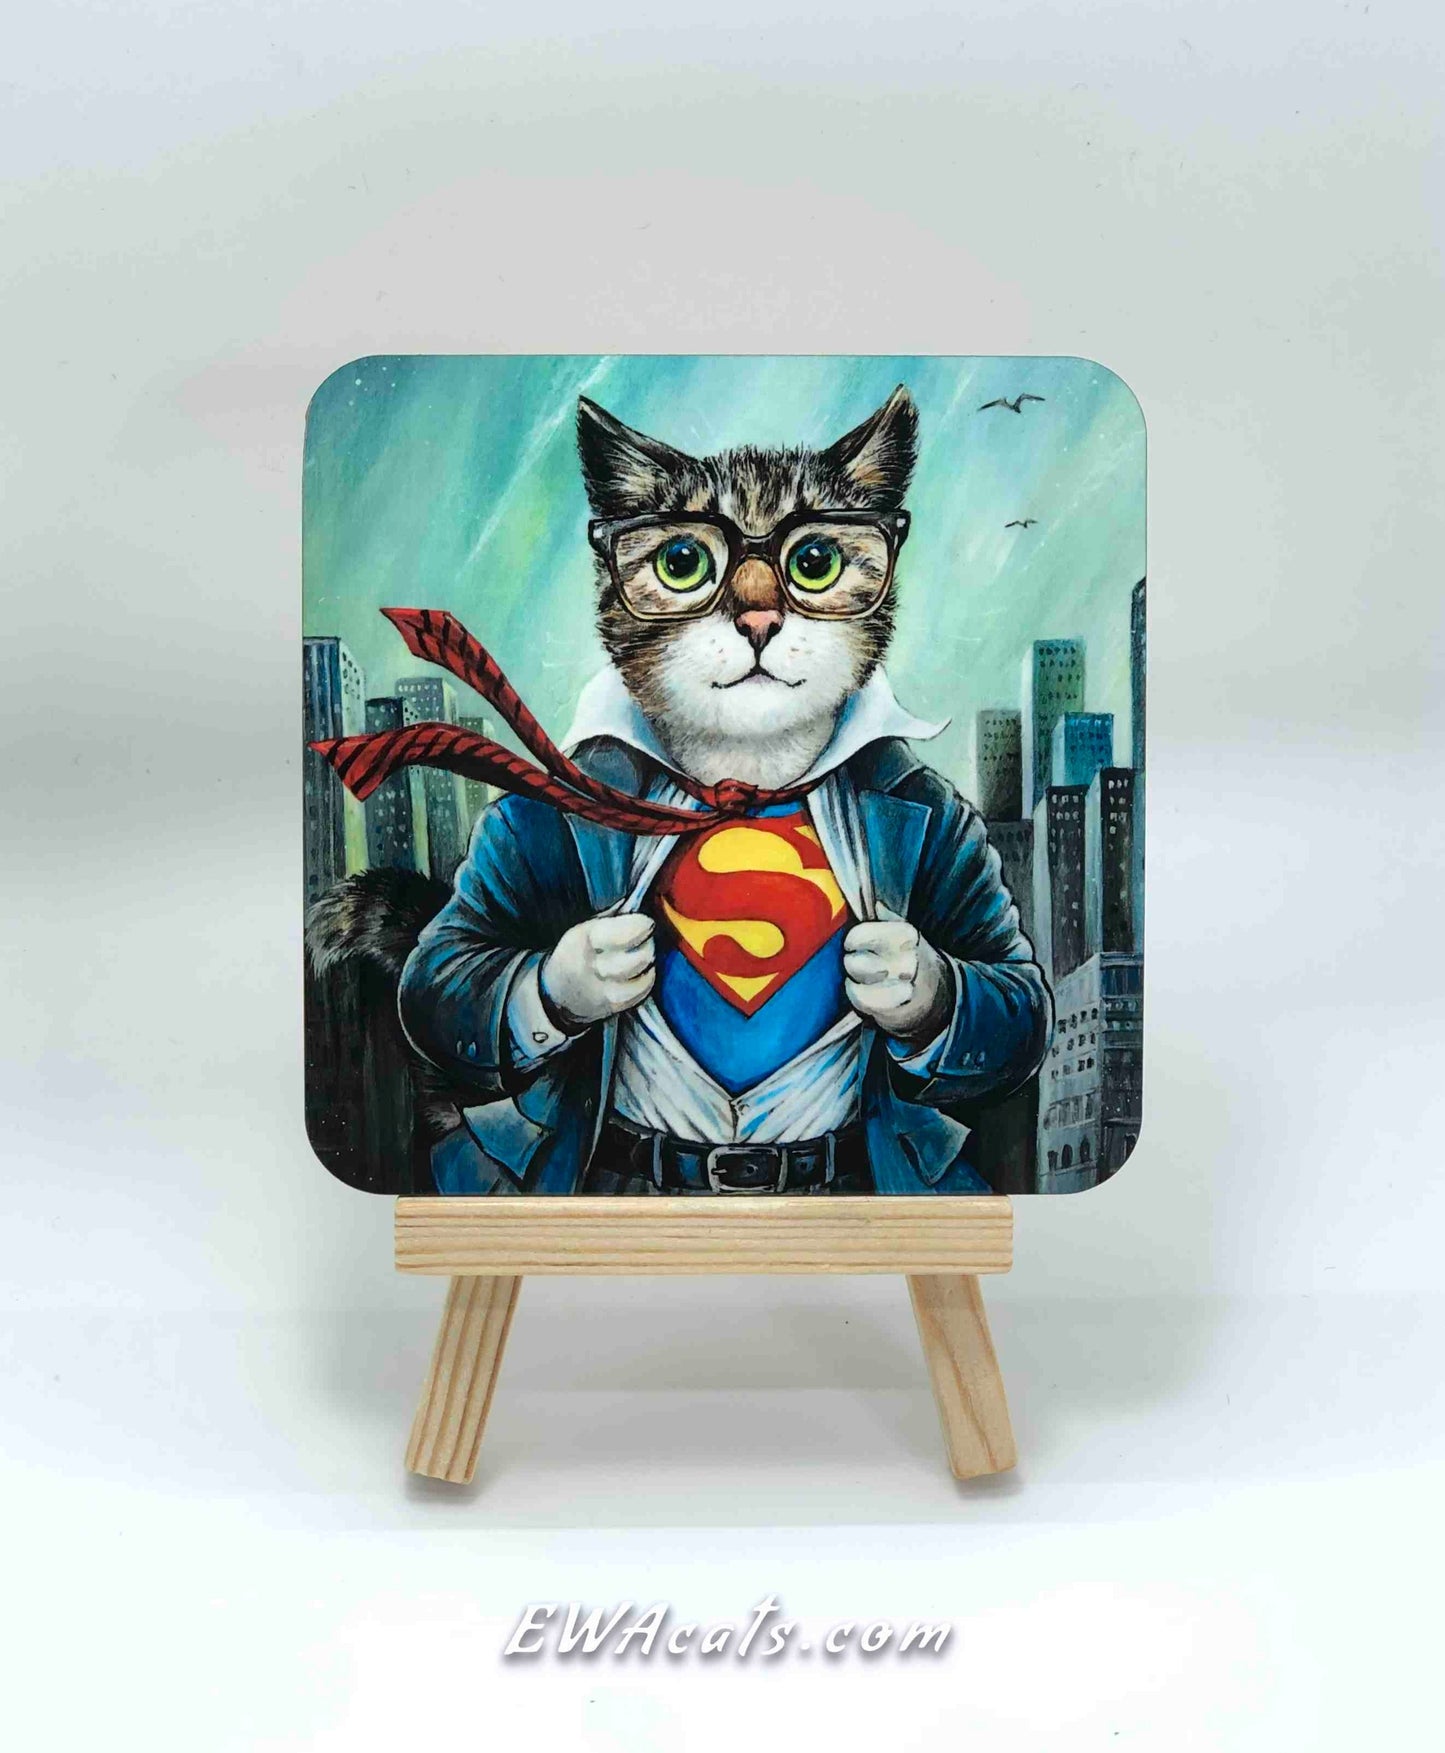 Coaster "The Cat of Steel"